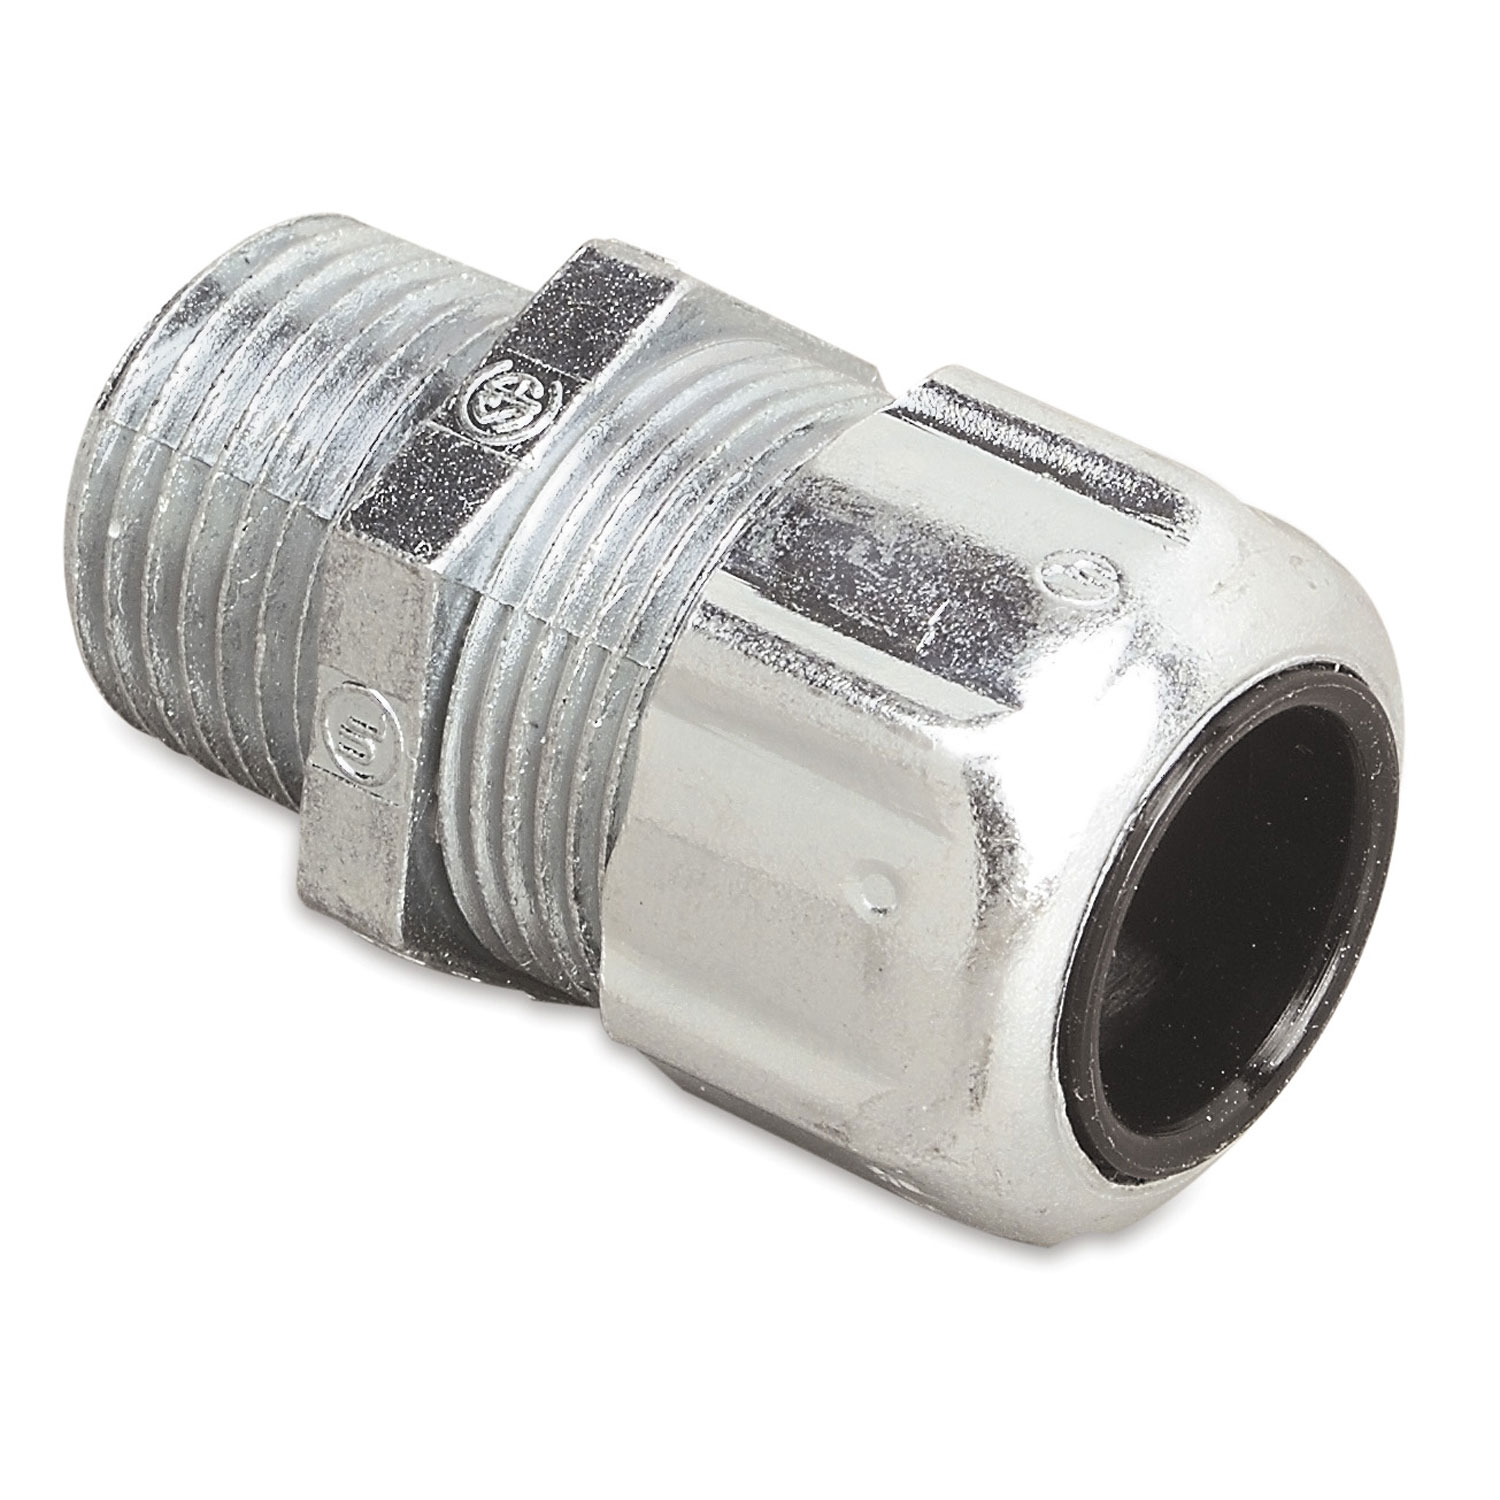 3/4" Inch Strain Relief Cable Connector Cord Grip .500" 